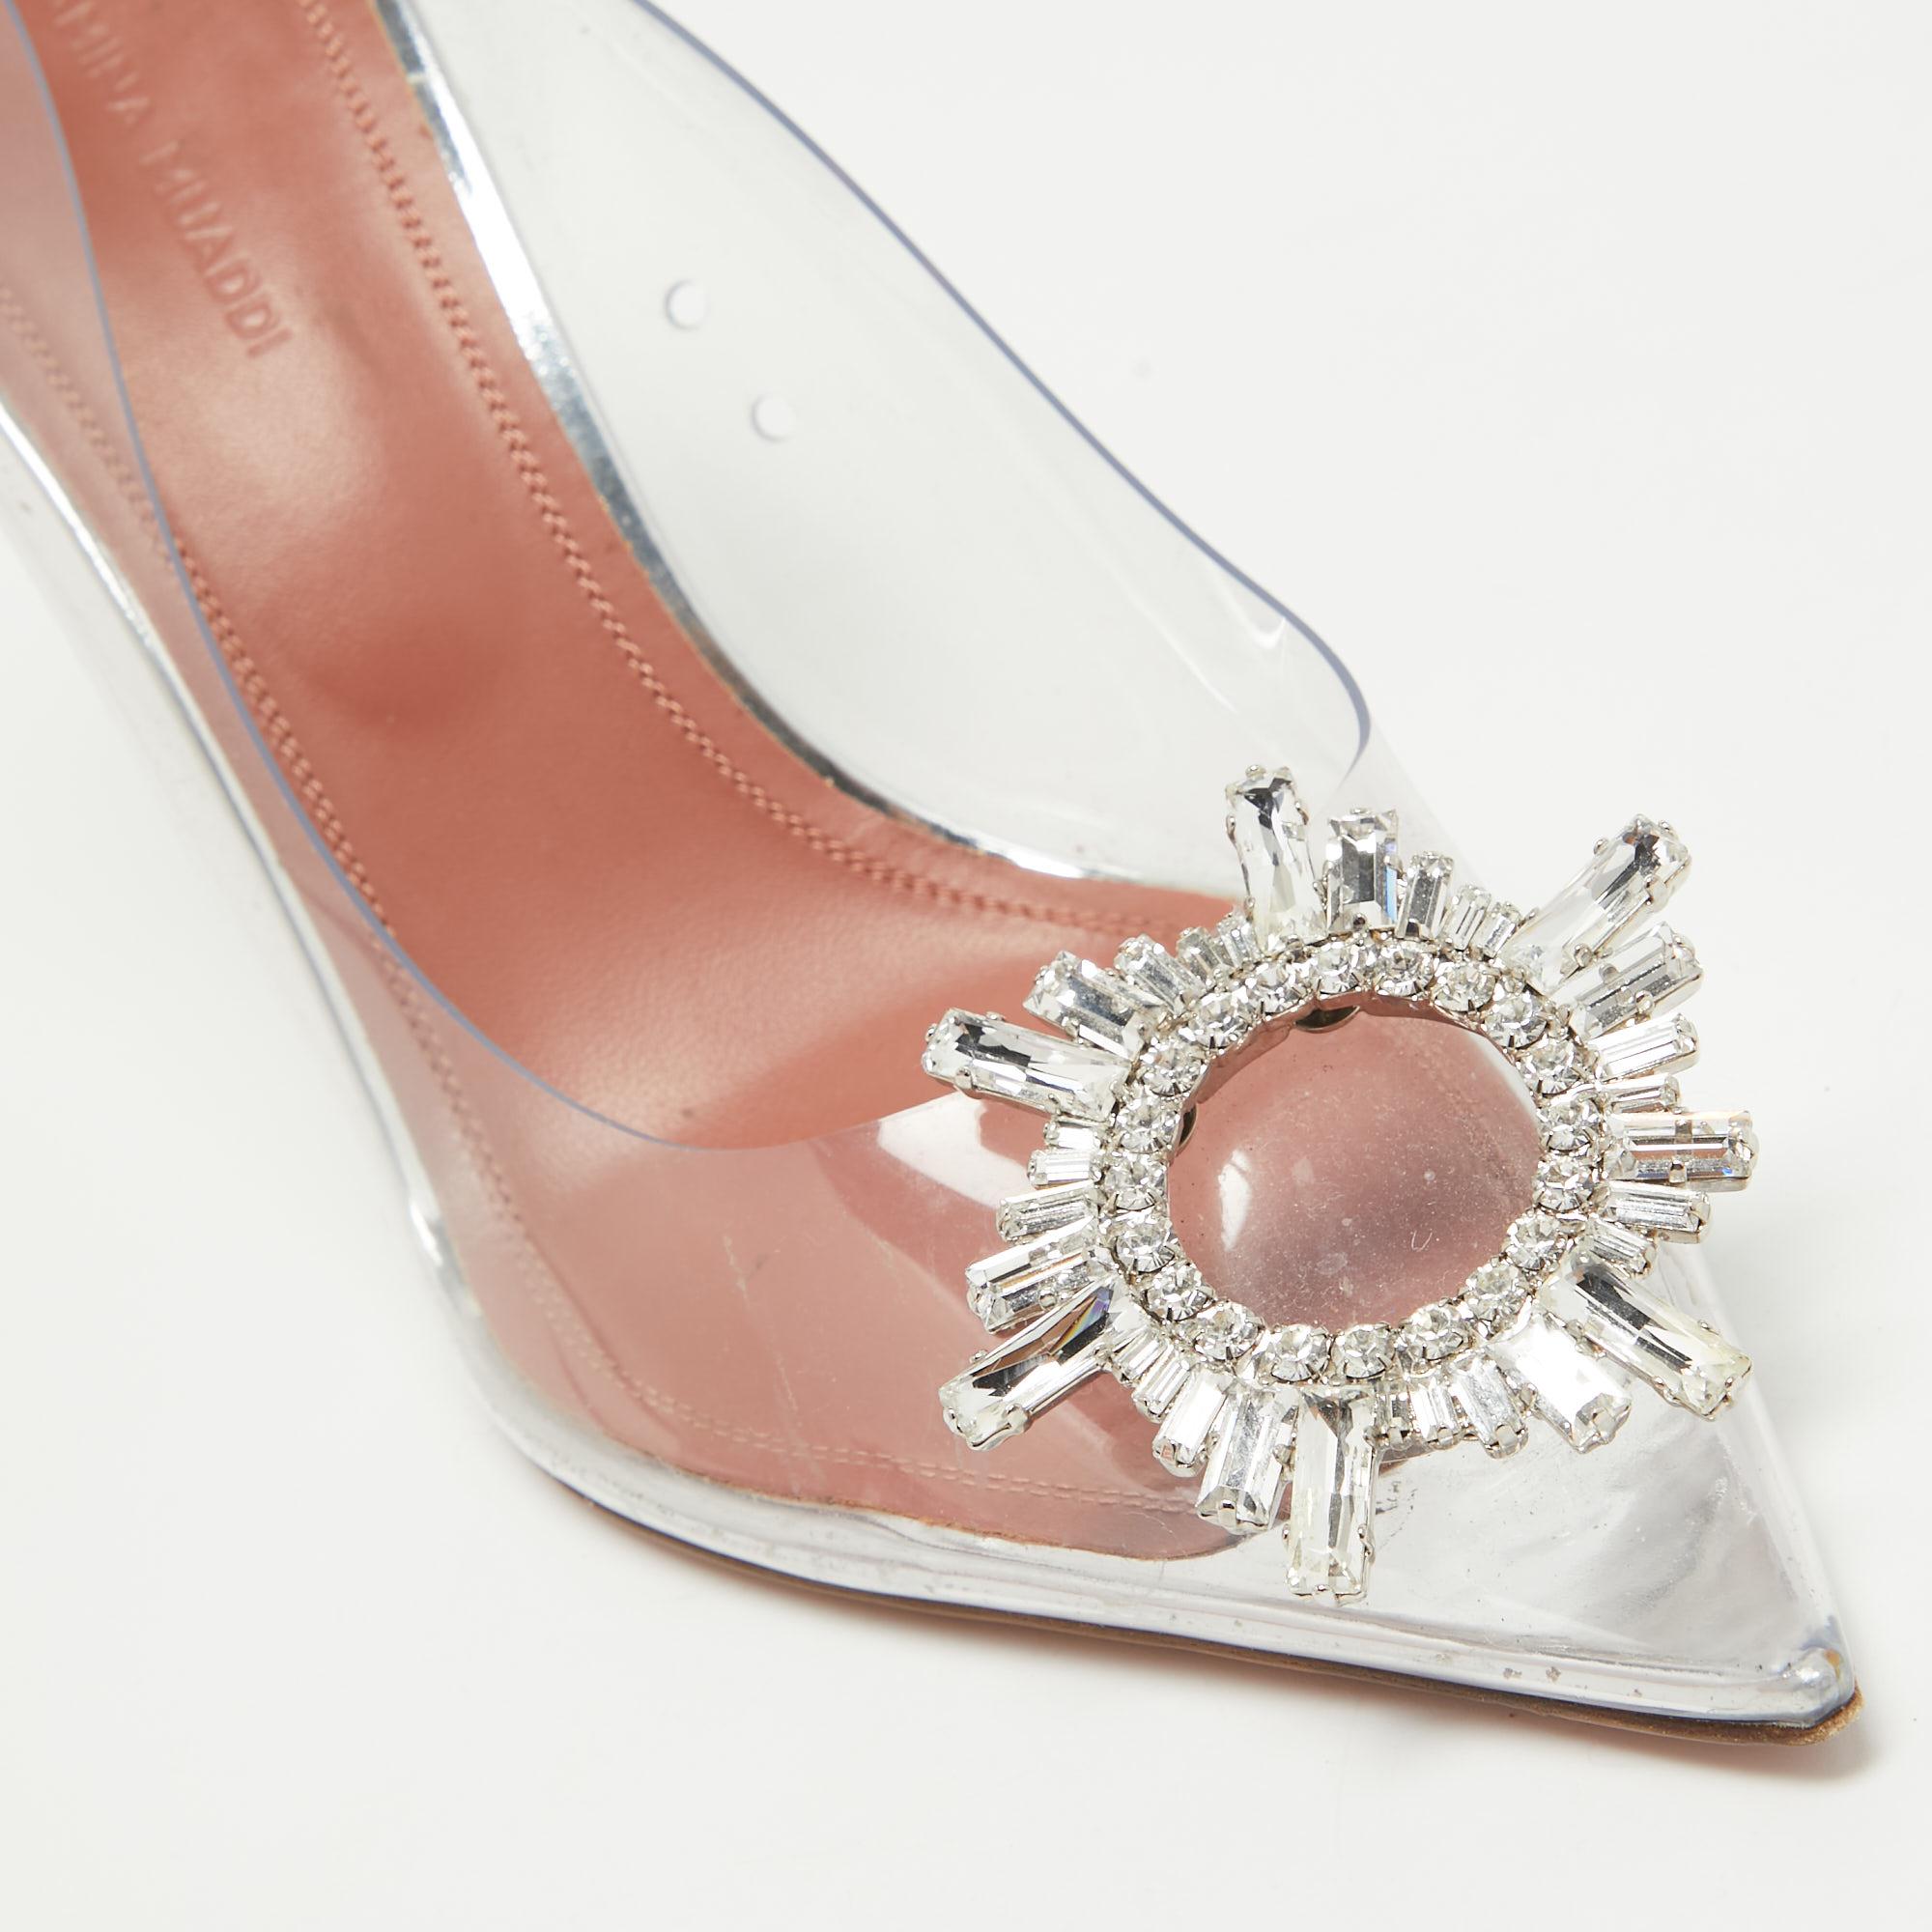 Innovative and timeless, these Amina Muaddi pumps are a modern take on fairy-tale shoes. The architectural silhouette of the pair is balanced on fluted heels and the crystal-embellished butterfly bow design decorates its front. Crafted from PVC, the